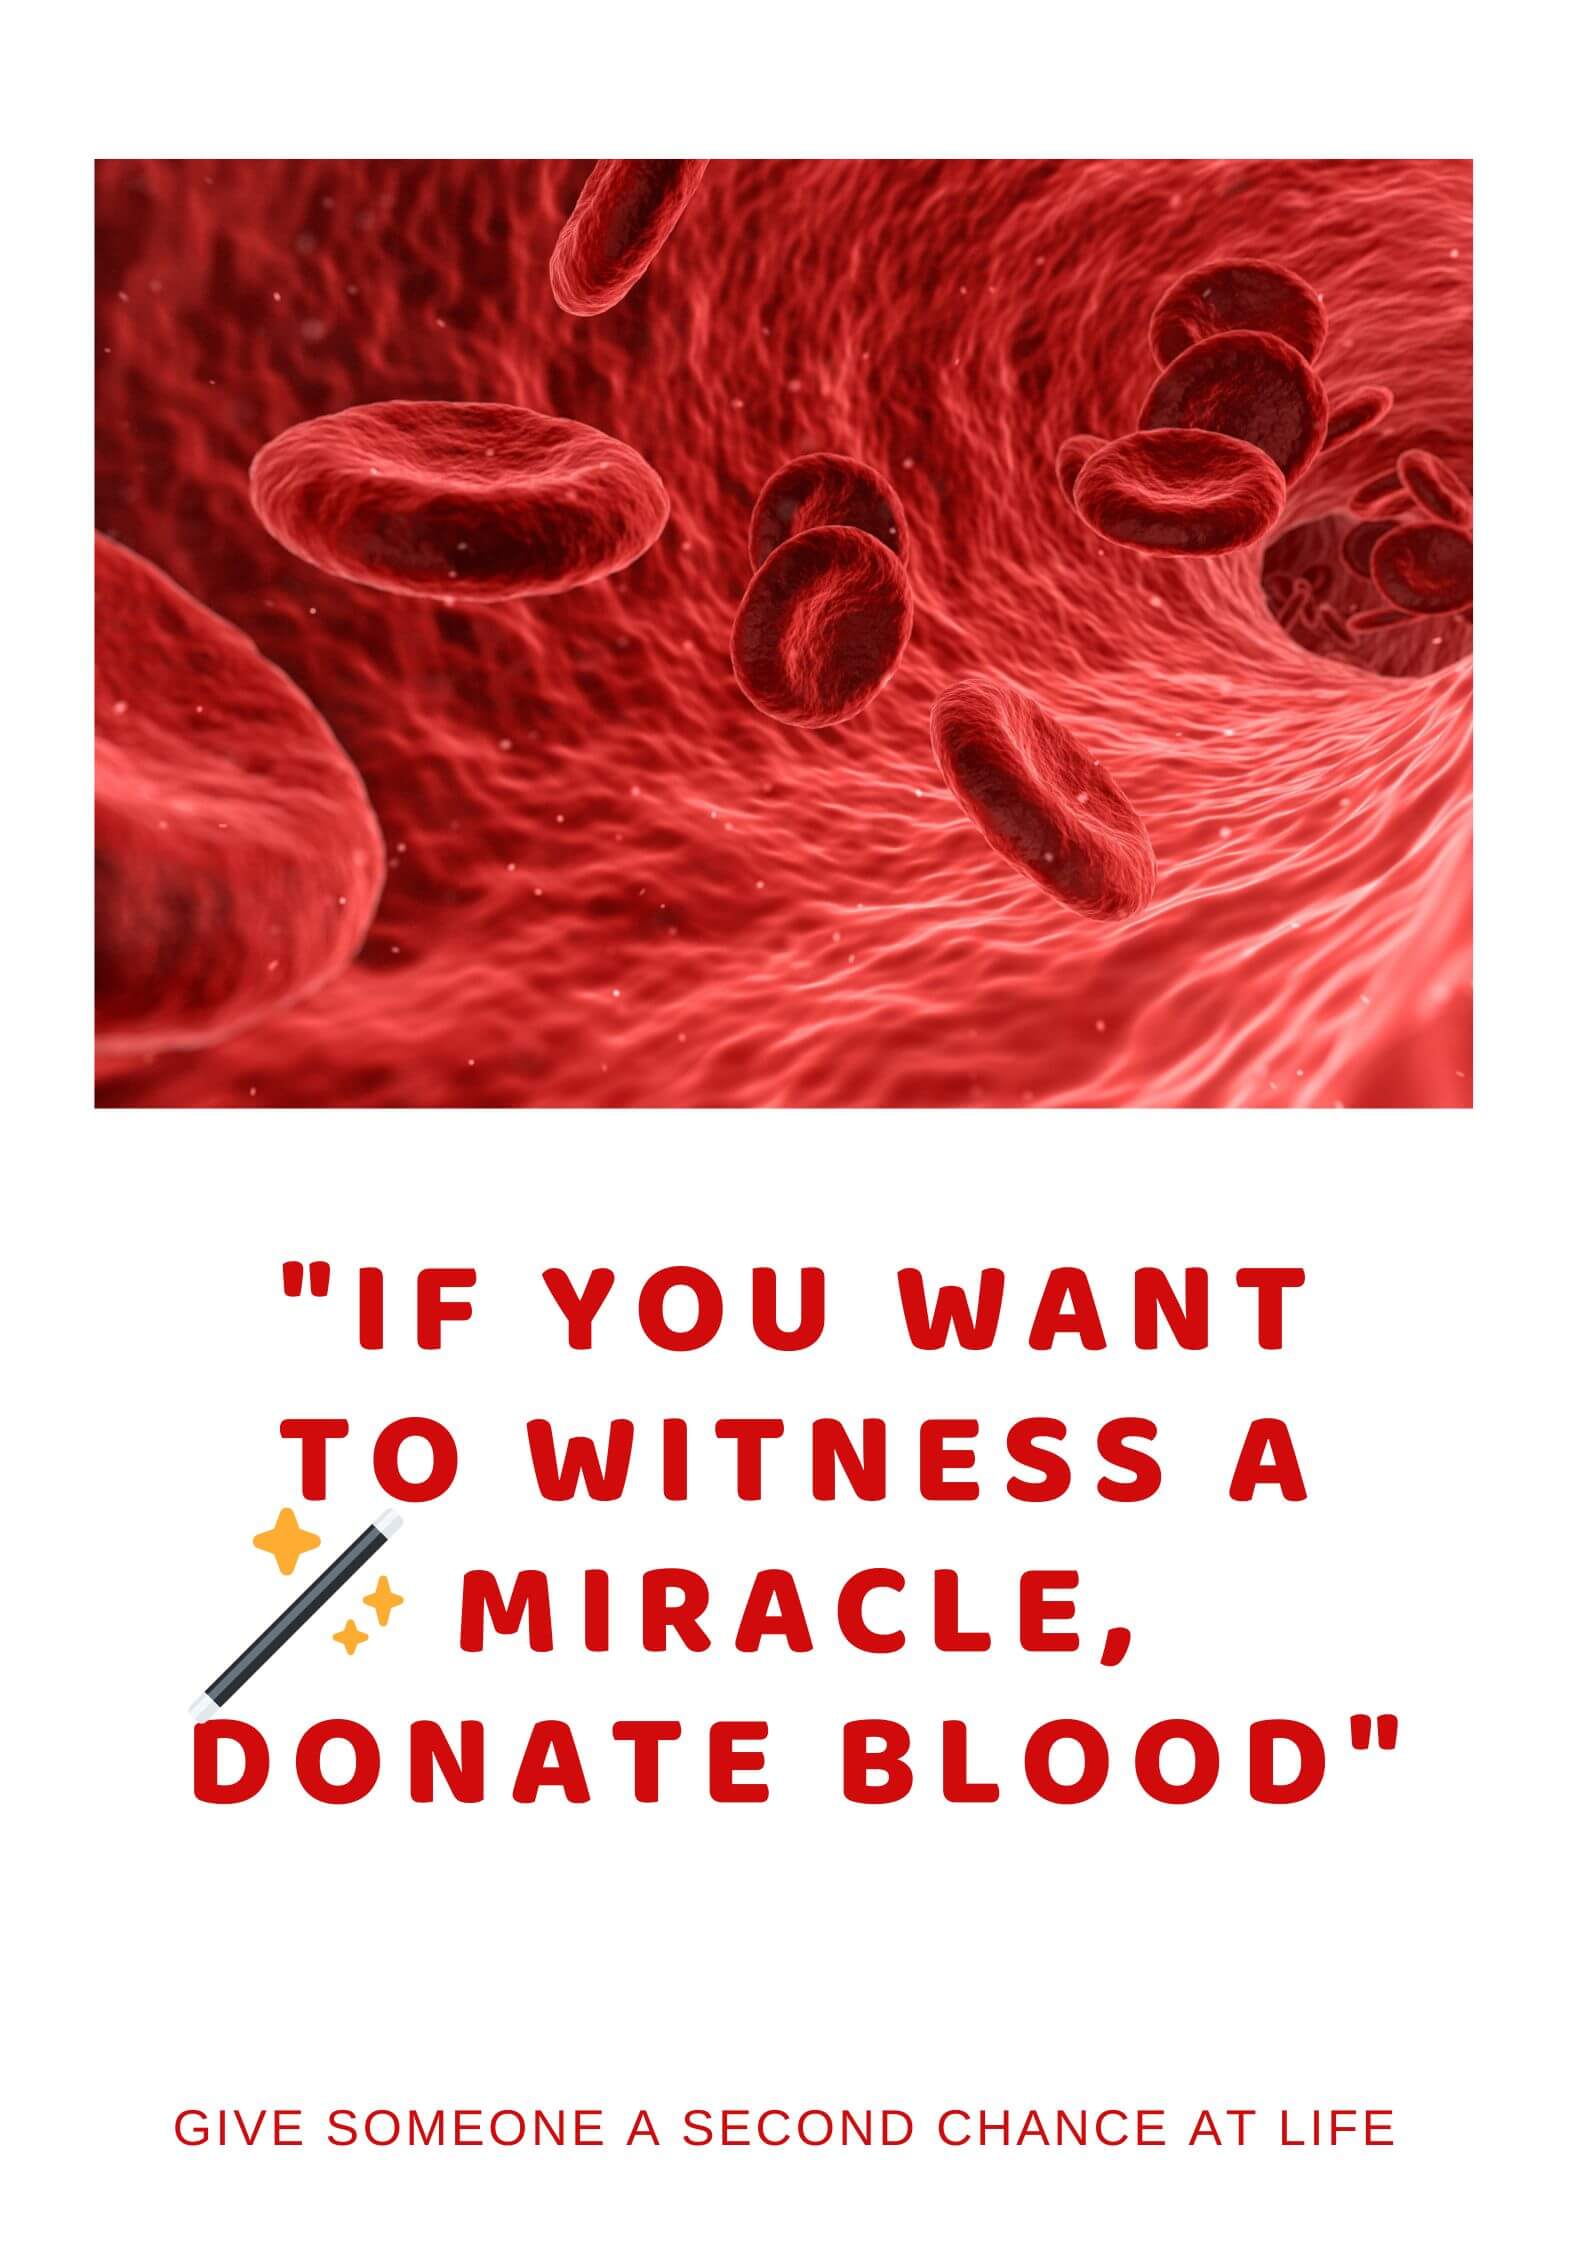 9 blood donation day poster